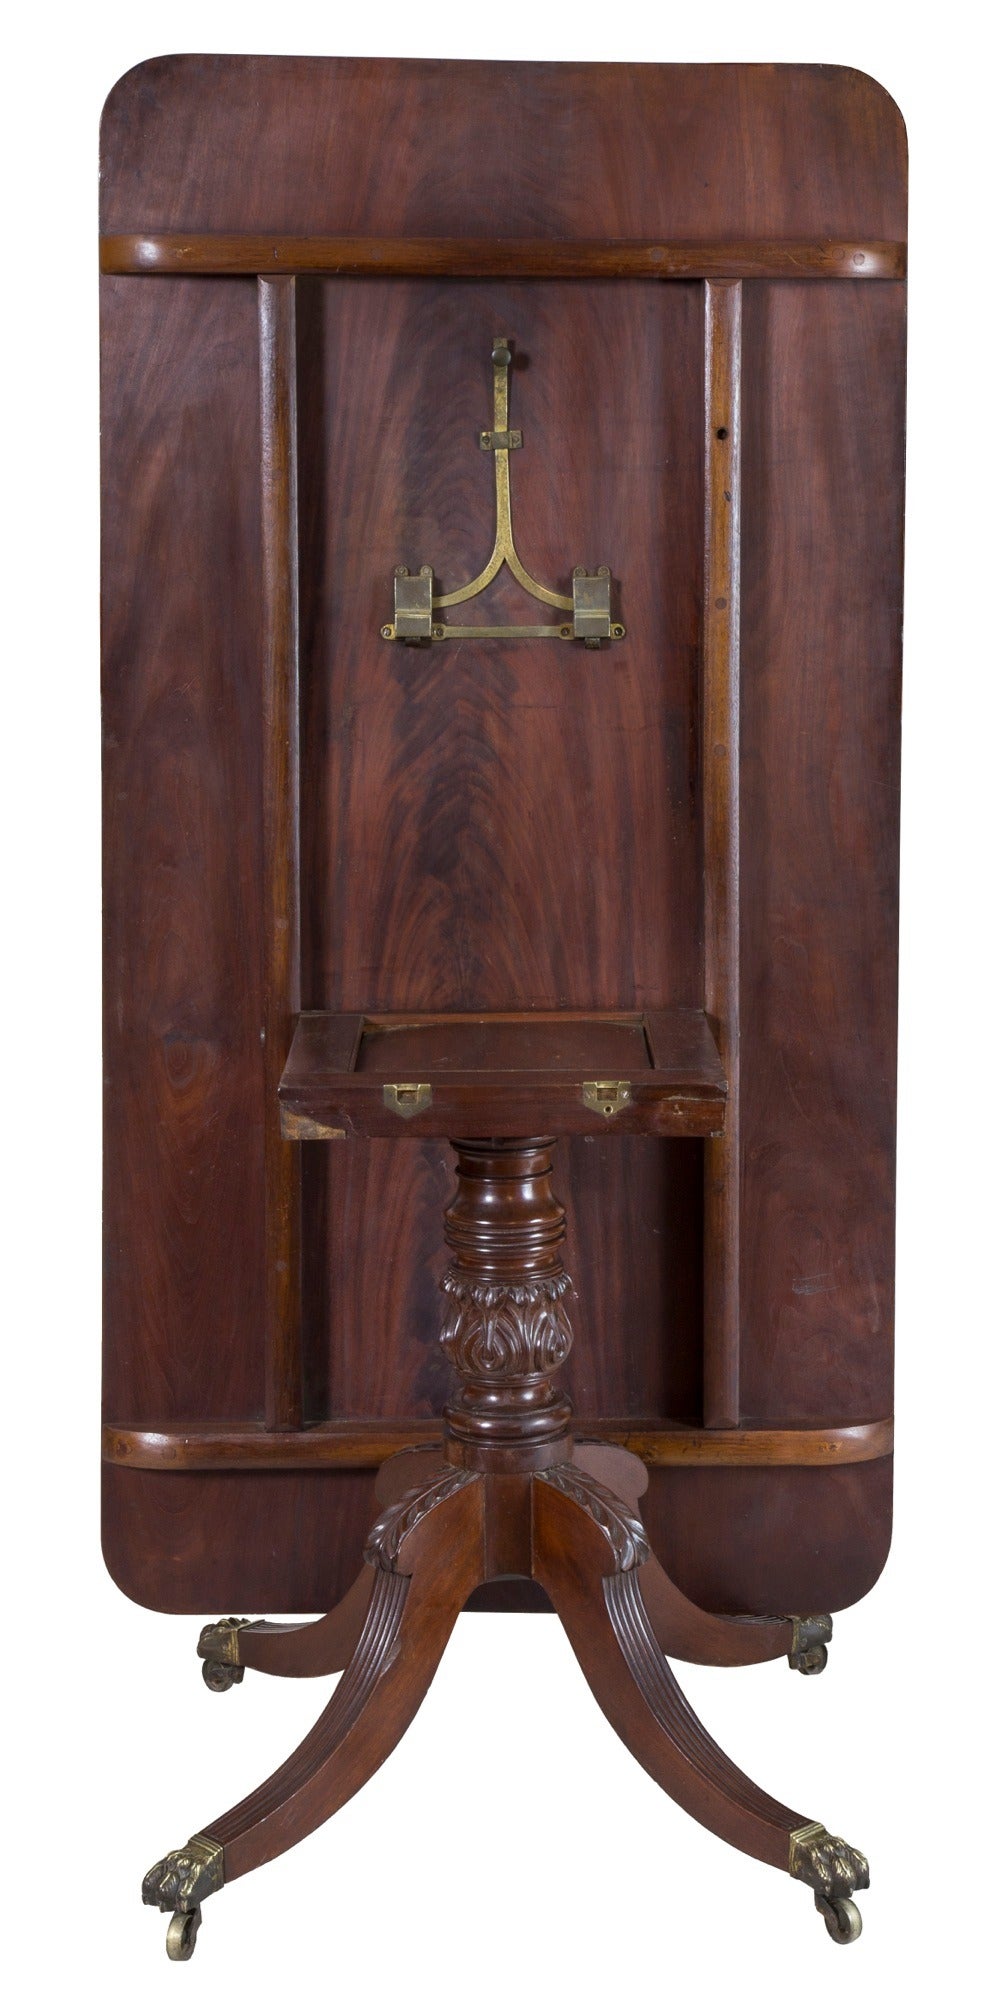 We have a number of breakfast tables that tilt up and all retain a similar pull up catch; however, this is the first of a New York Phyfe style we have seen. The urn is beautifully carved, as is the acanthus at the knee of each leg followed by